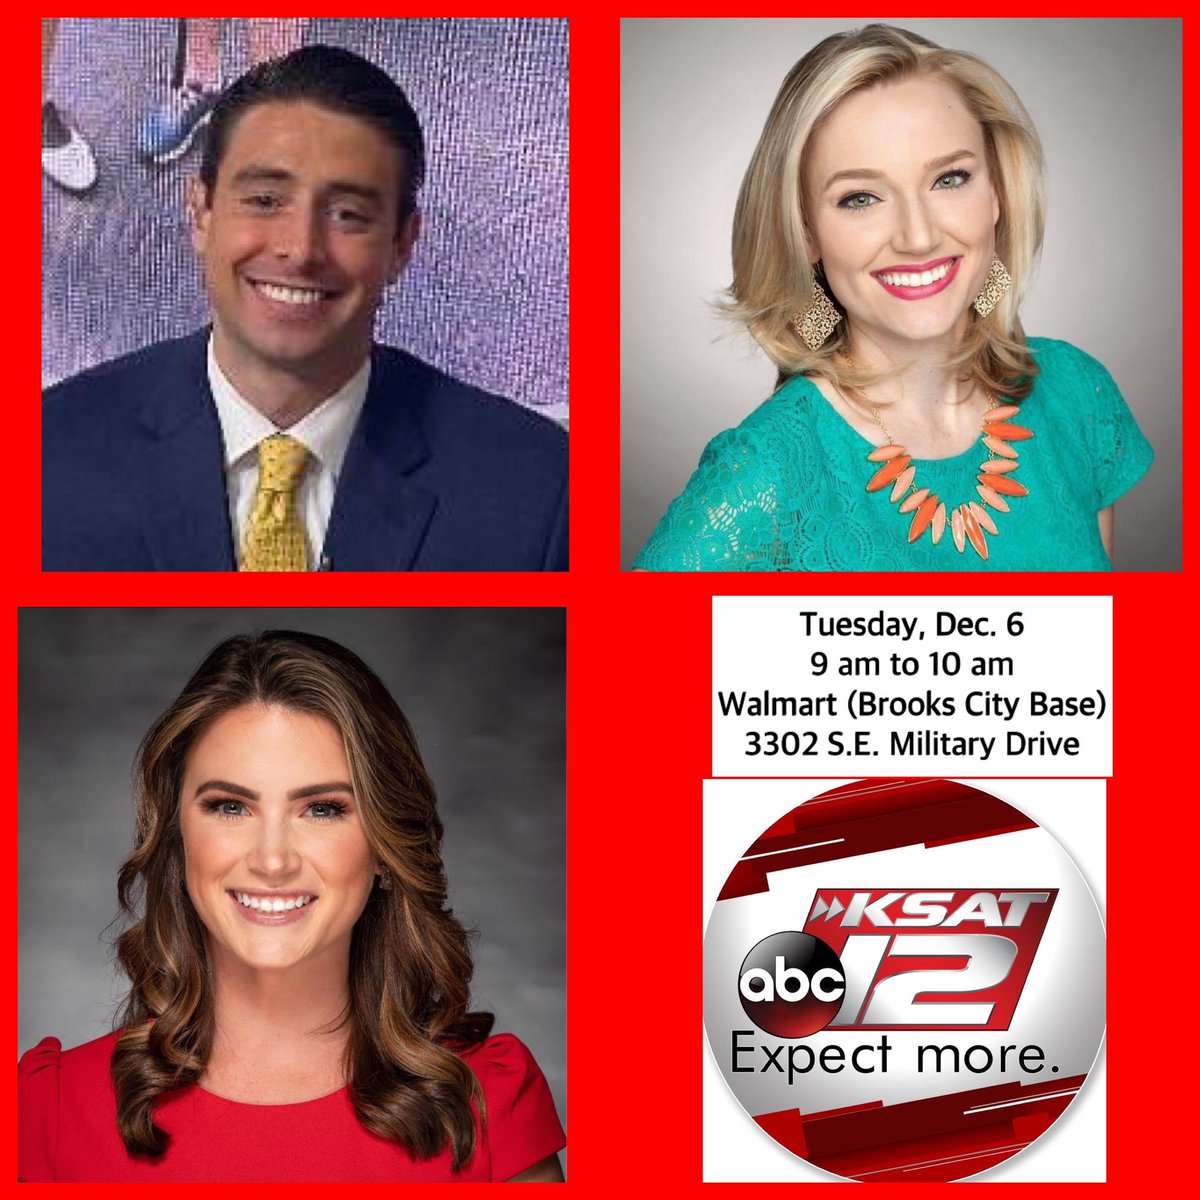 JOIN US at Walmart, 3302 SE Military Drive, 9am to 10 am TUESDAY as @ksatnews’ @MaxMasseyTV @KSATSarahSpivey @LeighWaldman will be collecting donations for their kettle from our #ParadeOfKettles competition. Donate online at rb.gy/r0axc3.